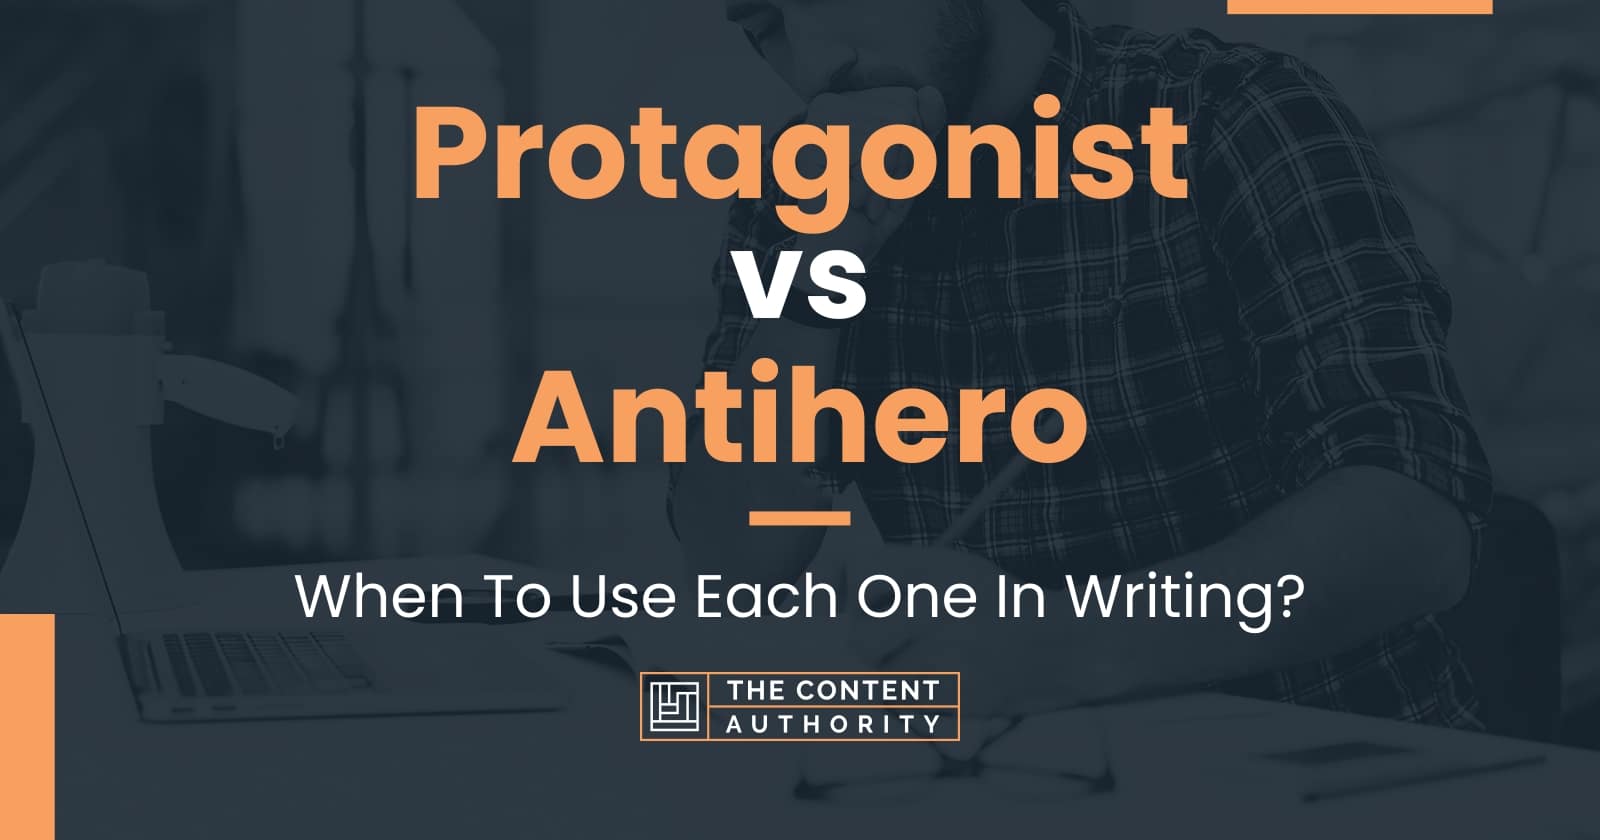 Protagonist vs Antihero: When To Use Each One In Writing?